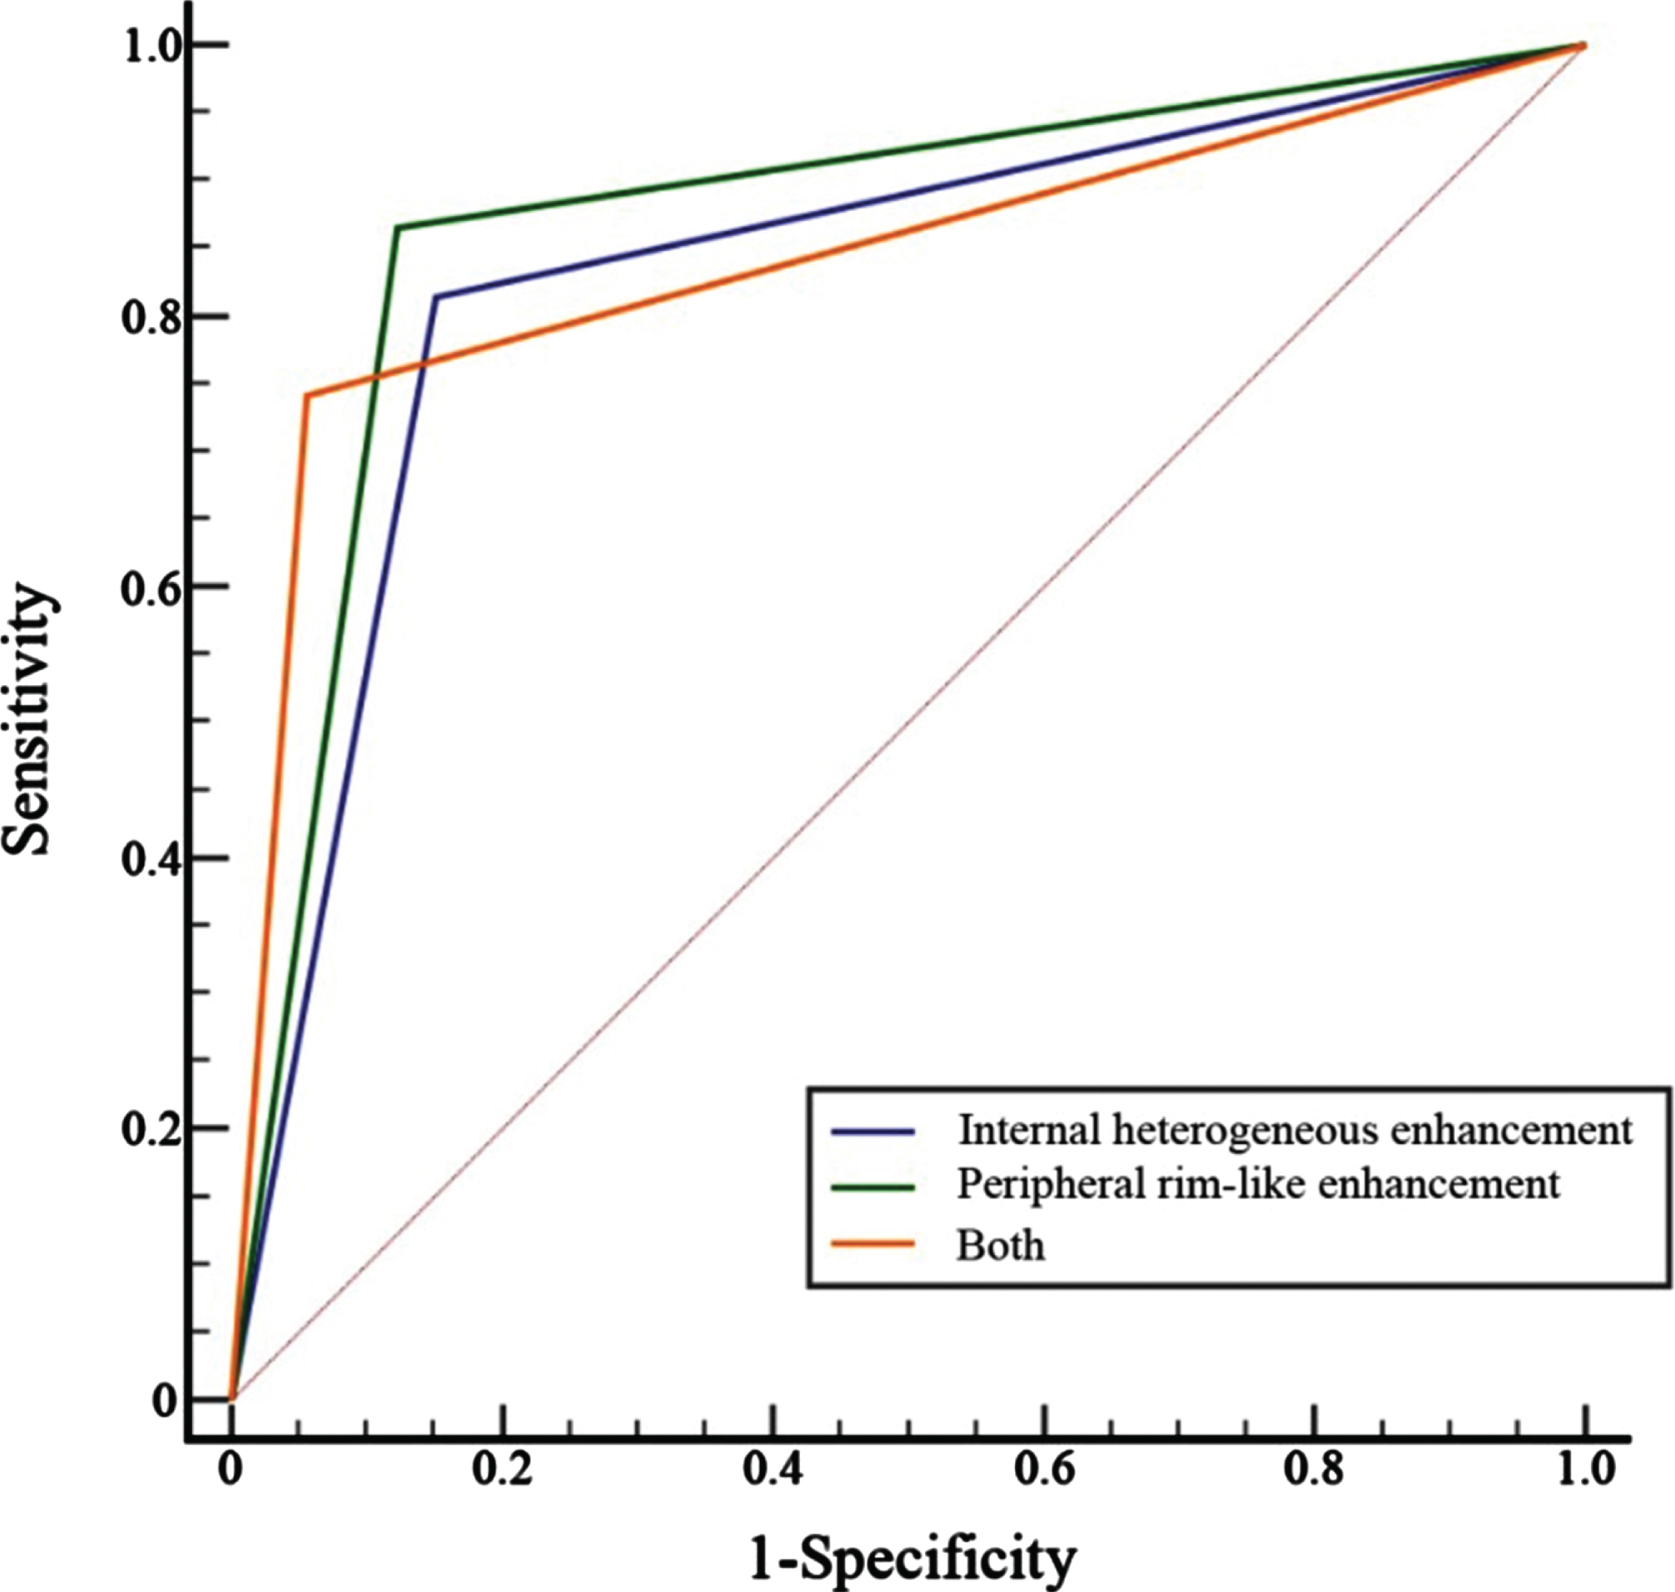 Receiver operating characteristic (ROC) curves for the diagnostic accuracy of CEUS in CTL.